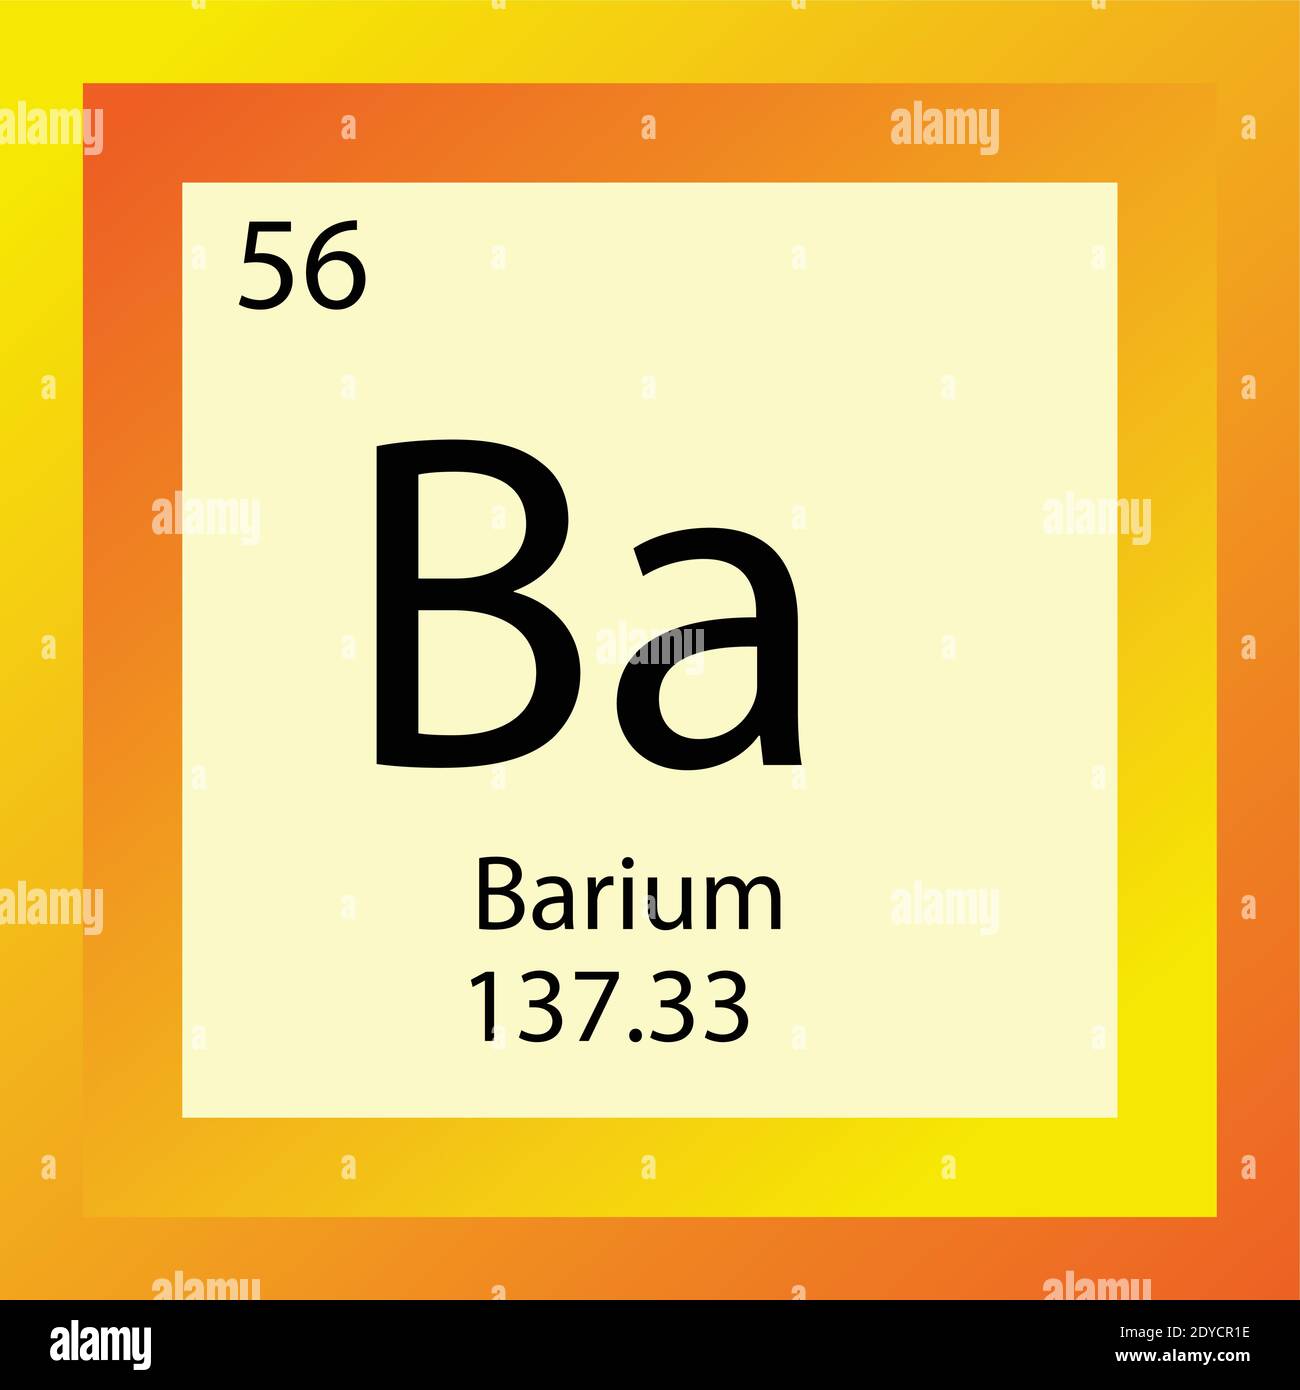 Ba Barium Chemical Element Periodic Table. Single element vector illustration, Alkaline Earth Metals element icon with molar mass and atomic number Stock Vector